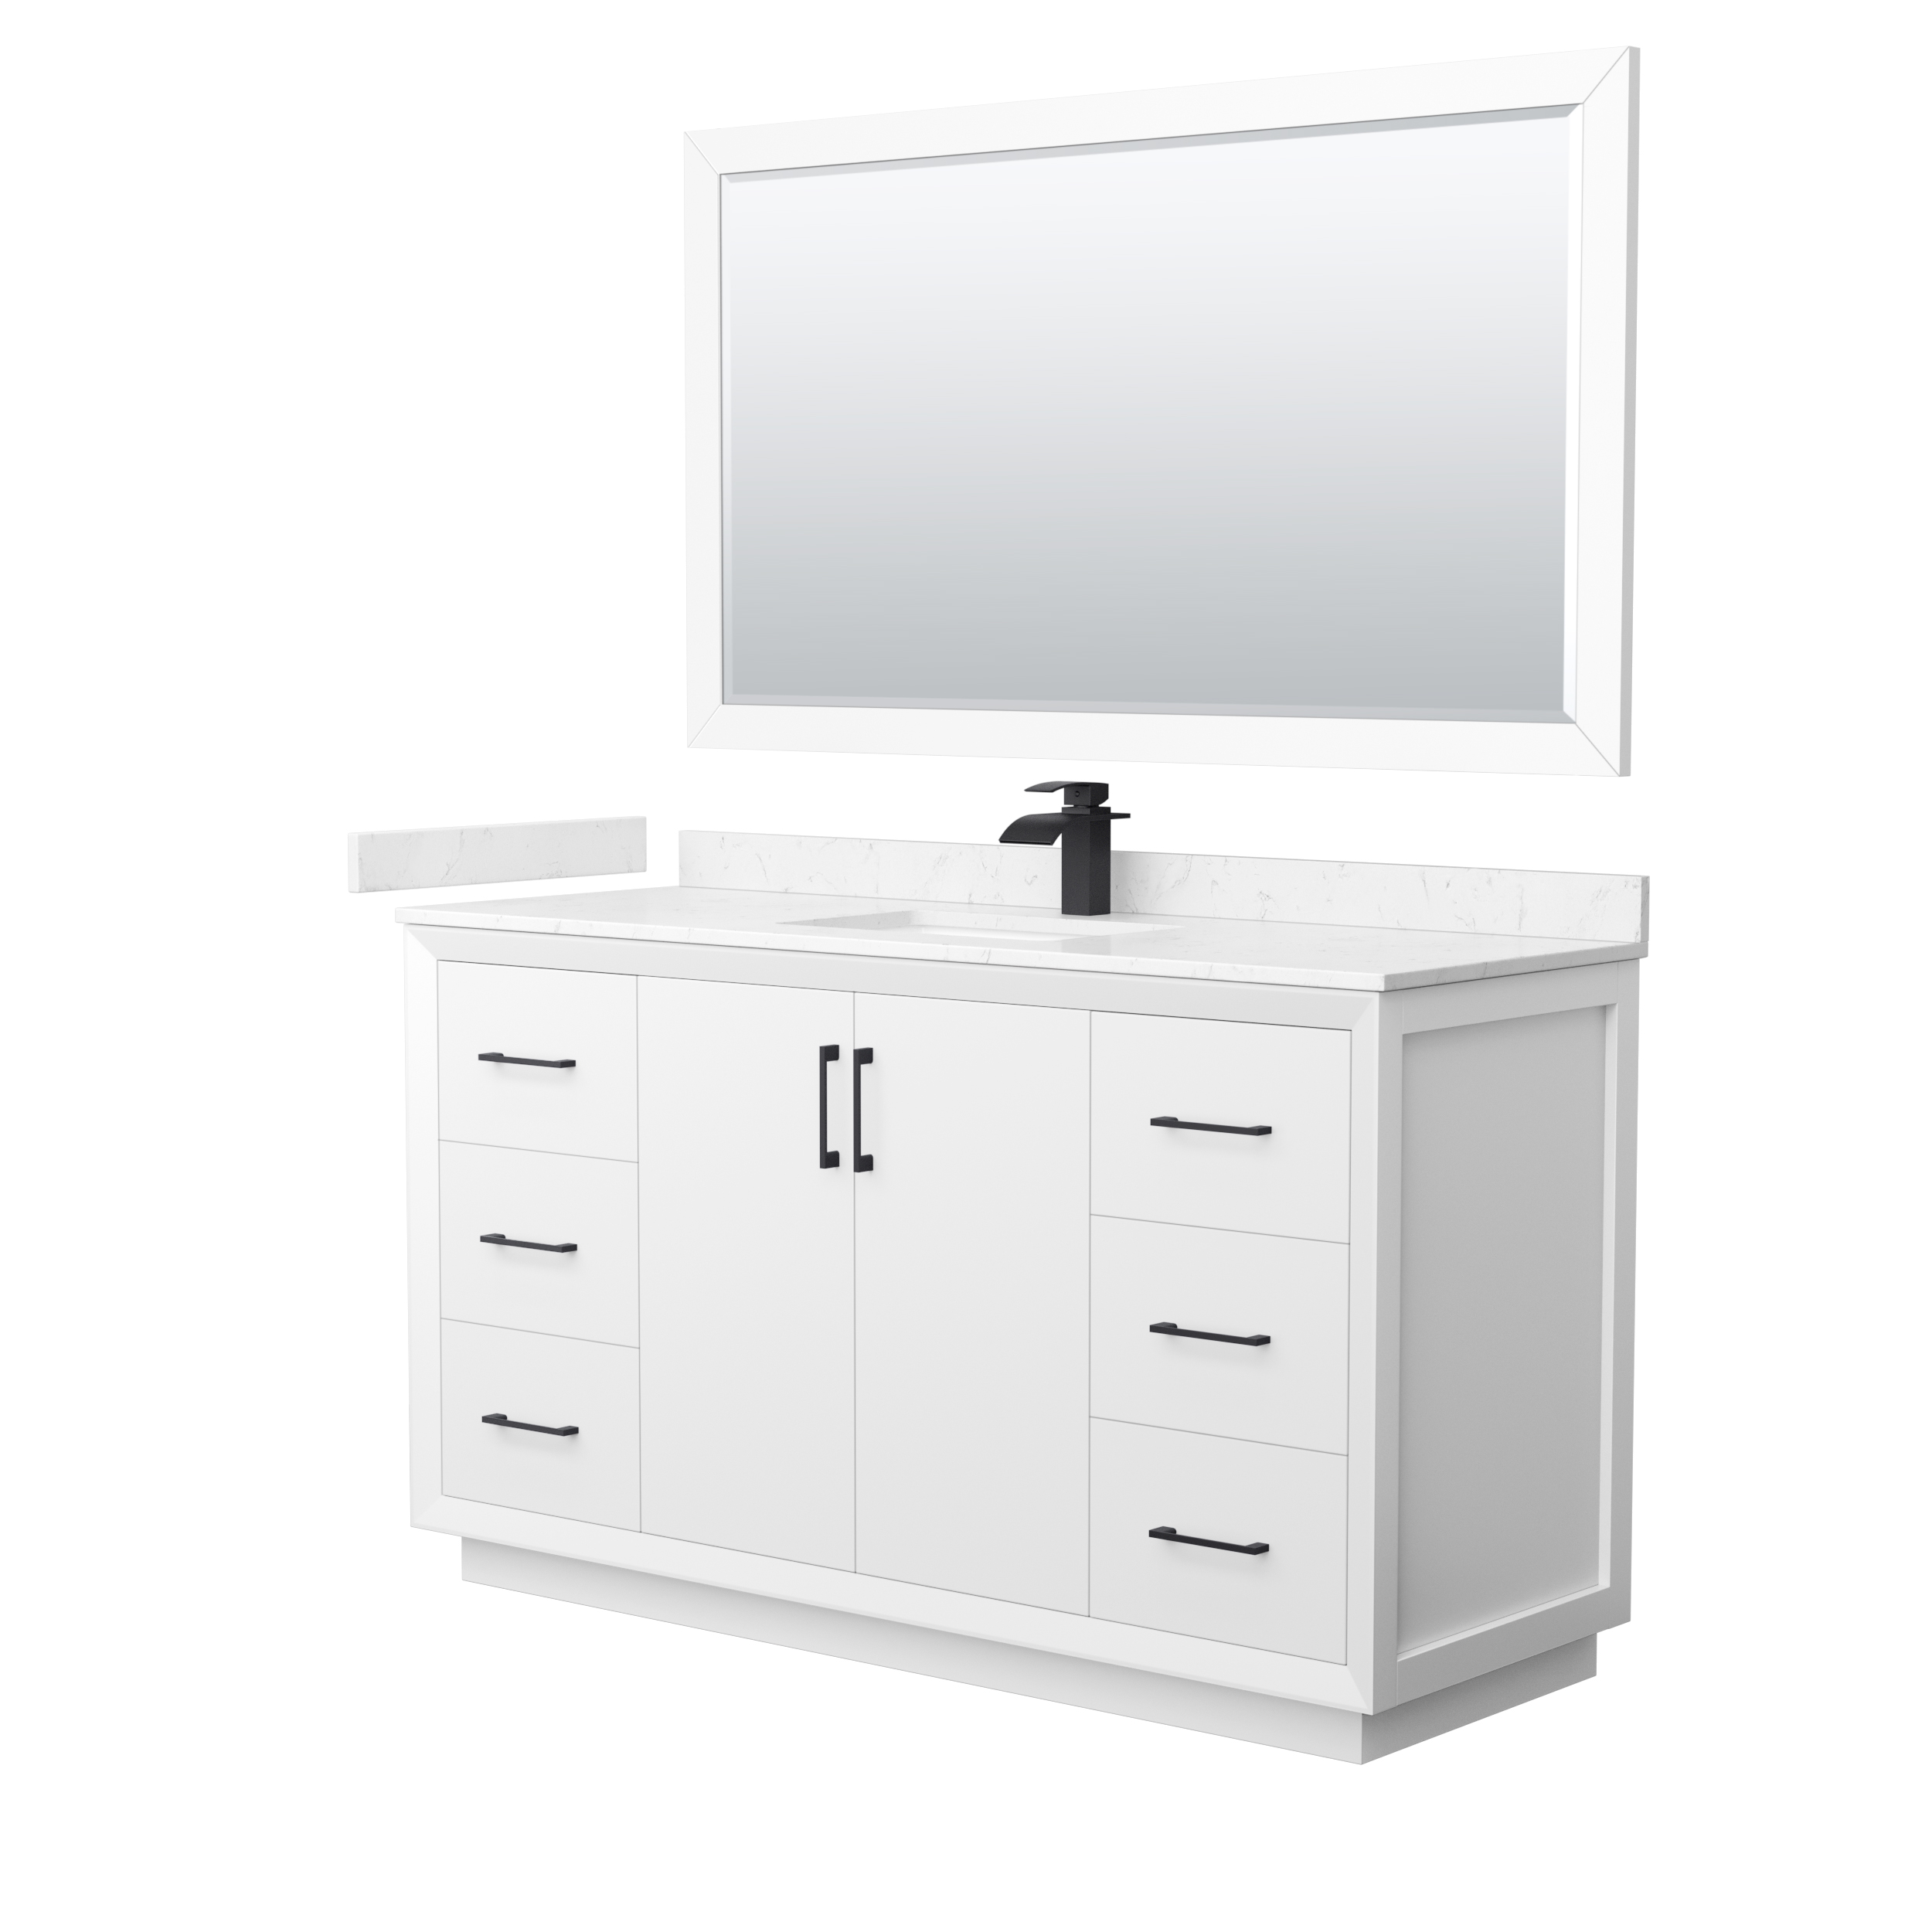 60" Transitional Single Vanity Base in White, 3 Top Option, with 3 Hardware Options and Mirror Option